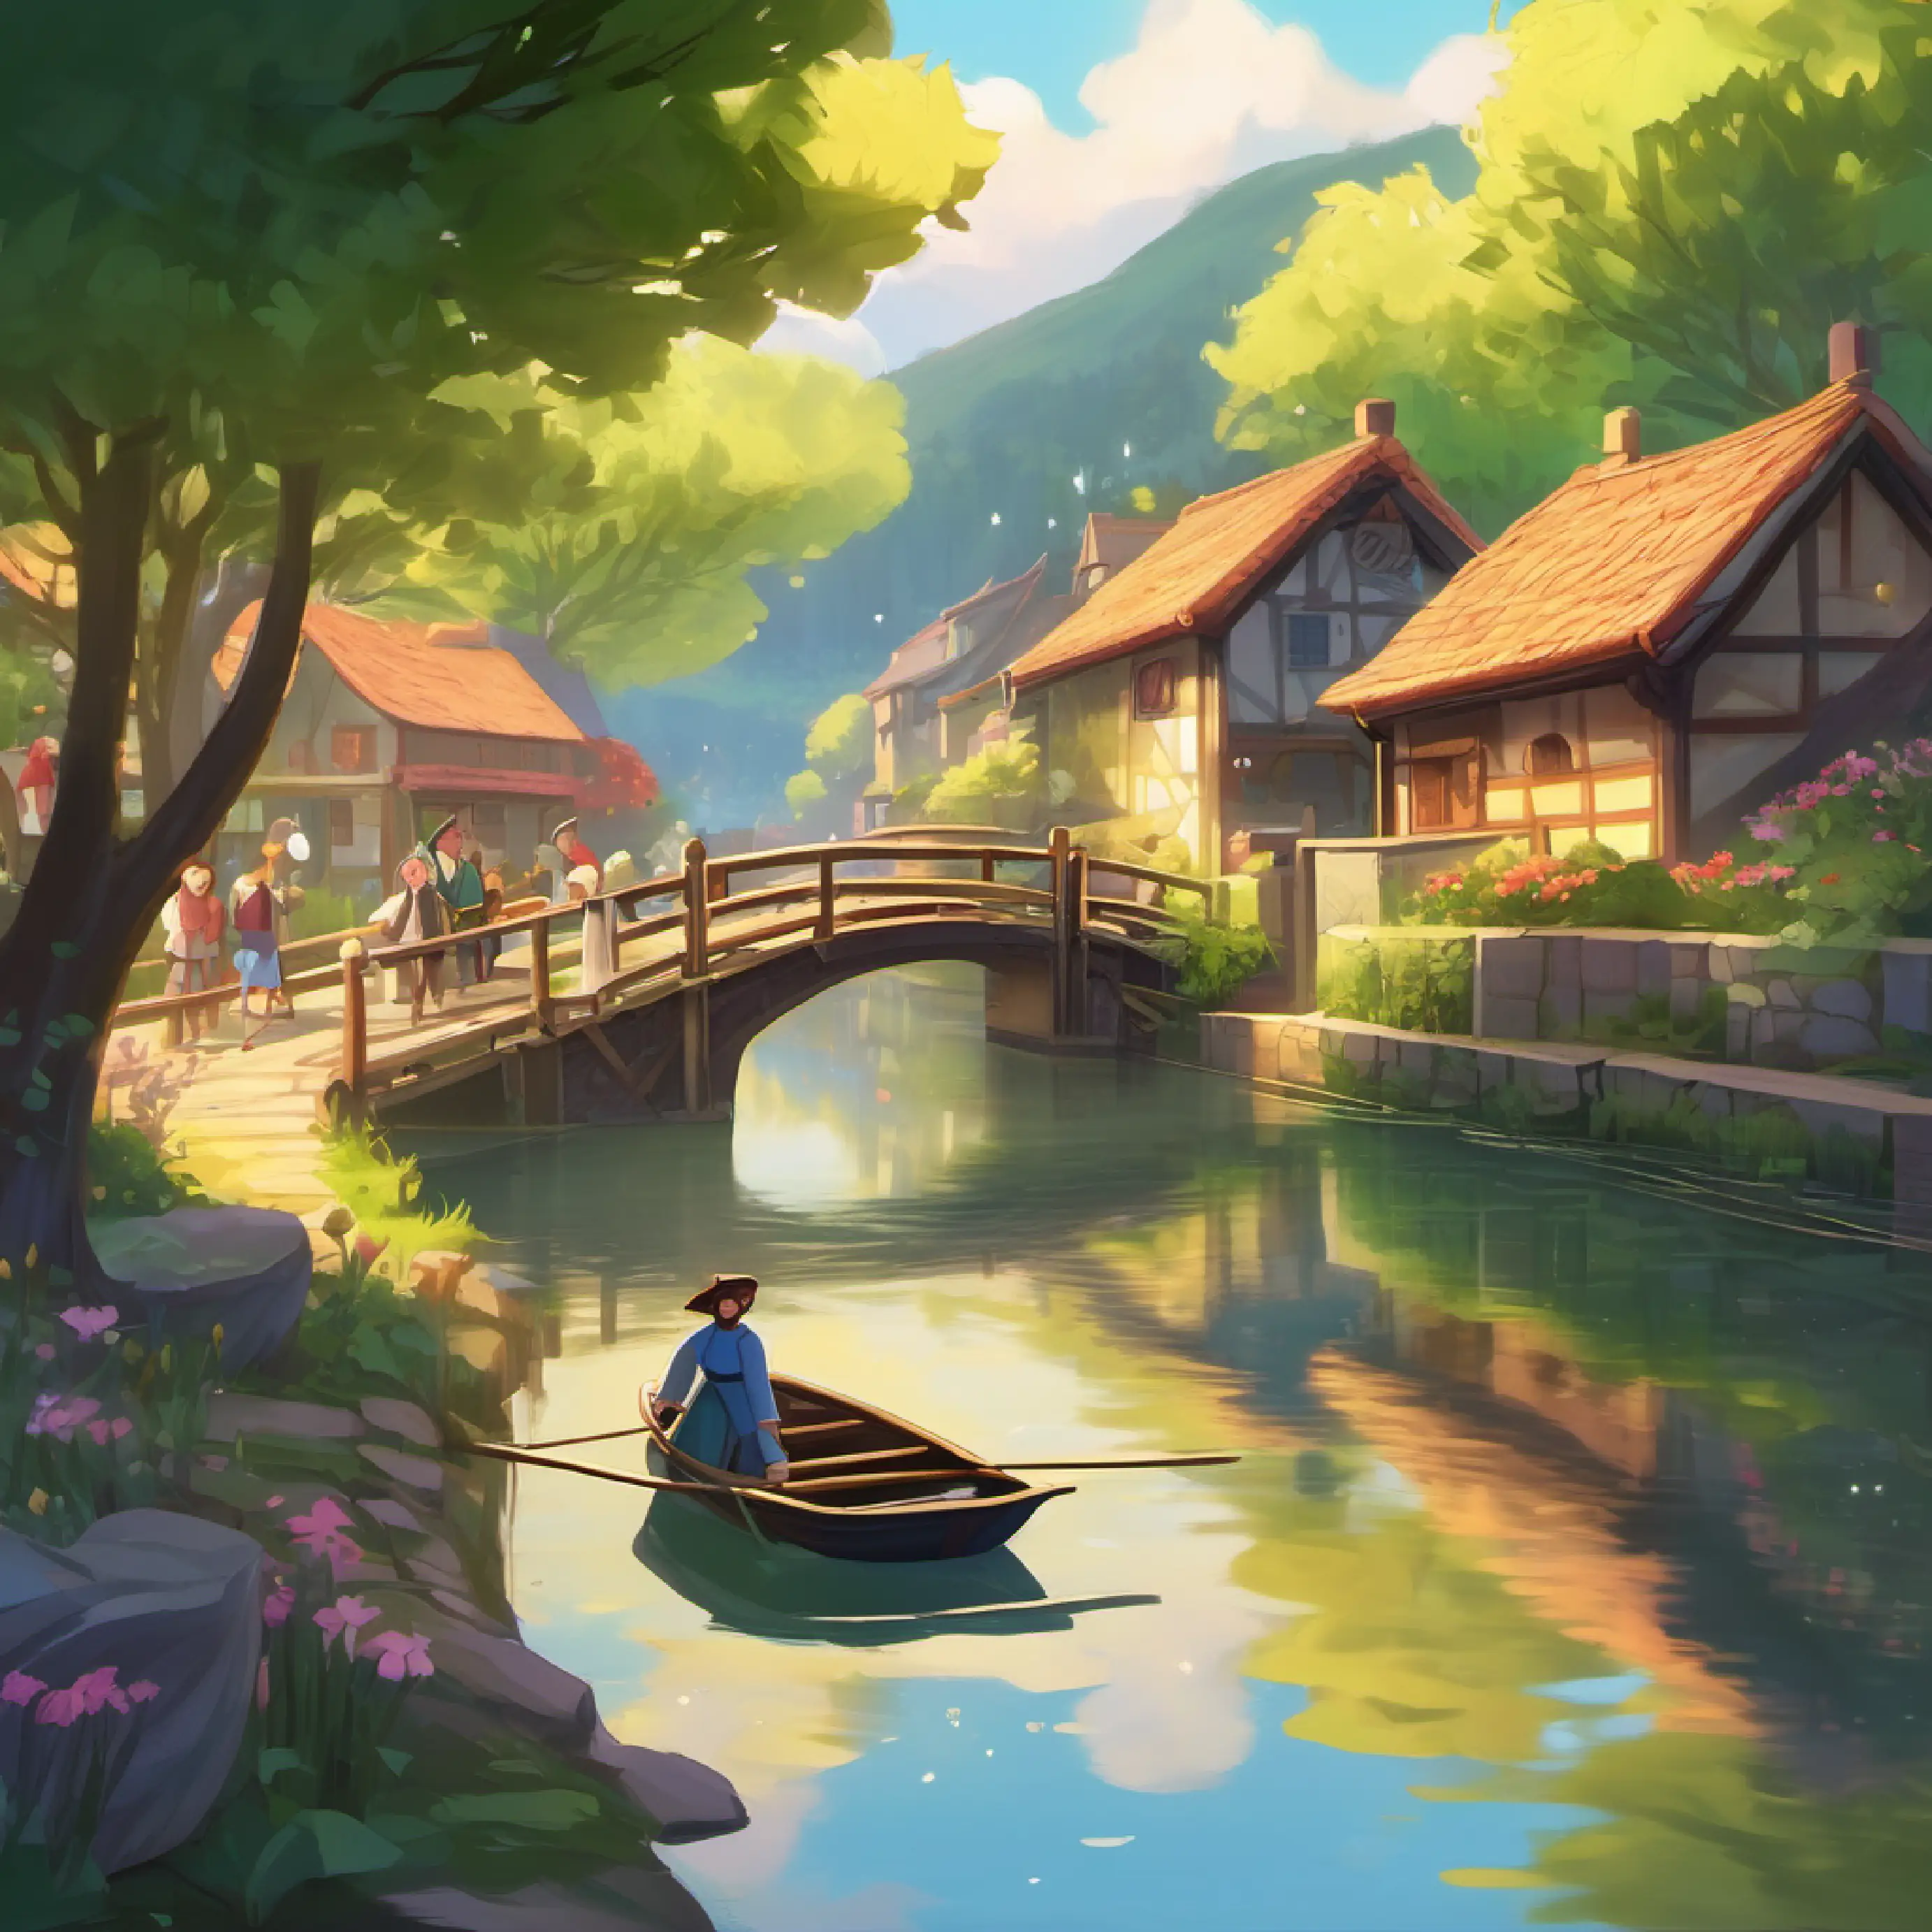 The village council appreciated Lily's efforts and decided to organize regular clean-up events. The town soon became cleaner, and the river sparkled once more. Everyone thanked Lily for her dedication to cleanliness and the environment.